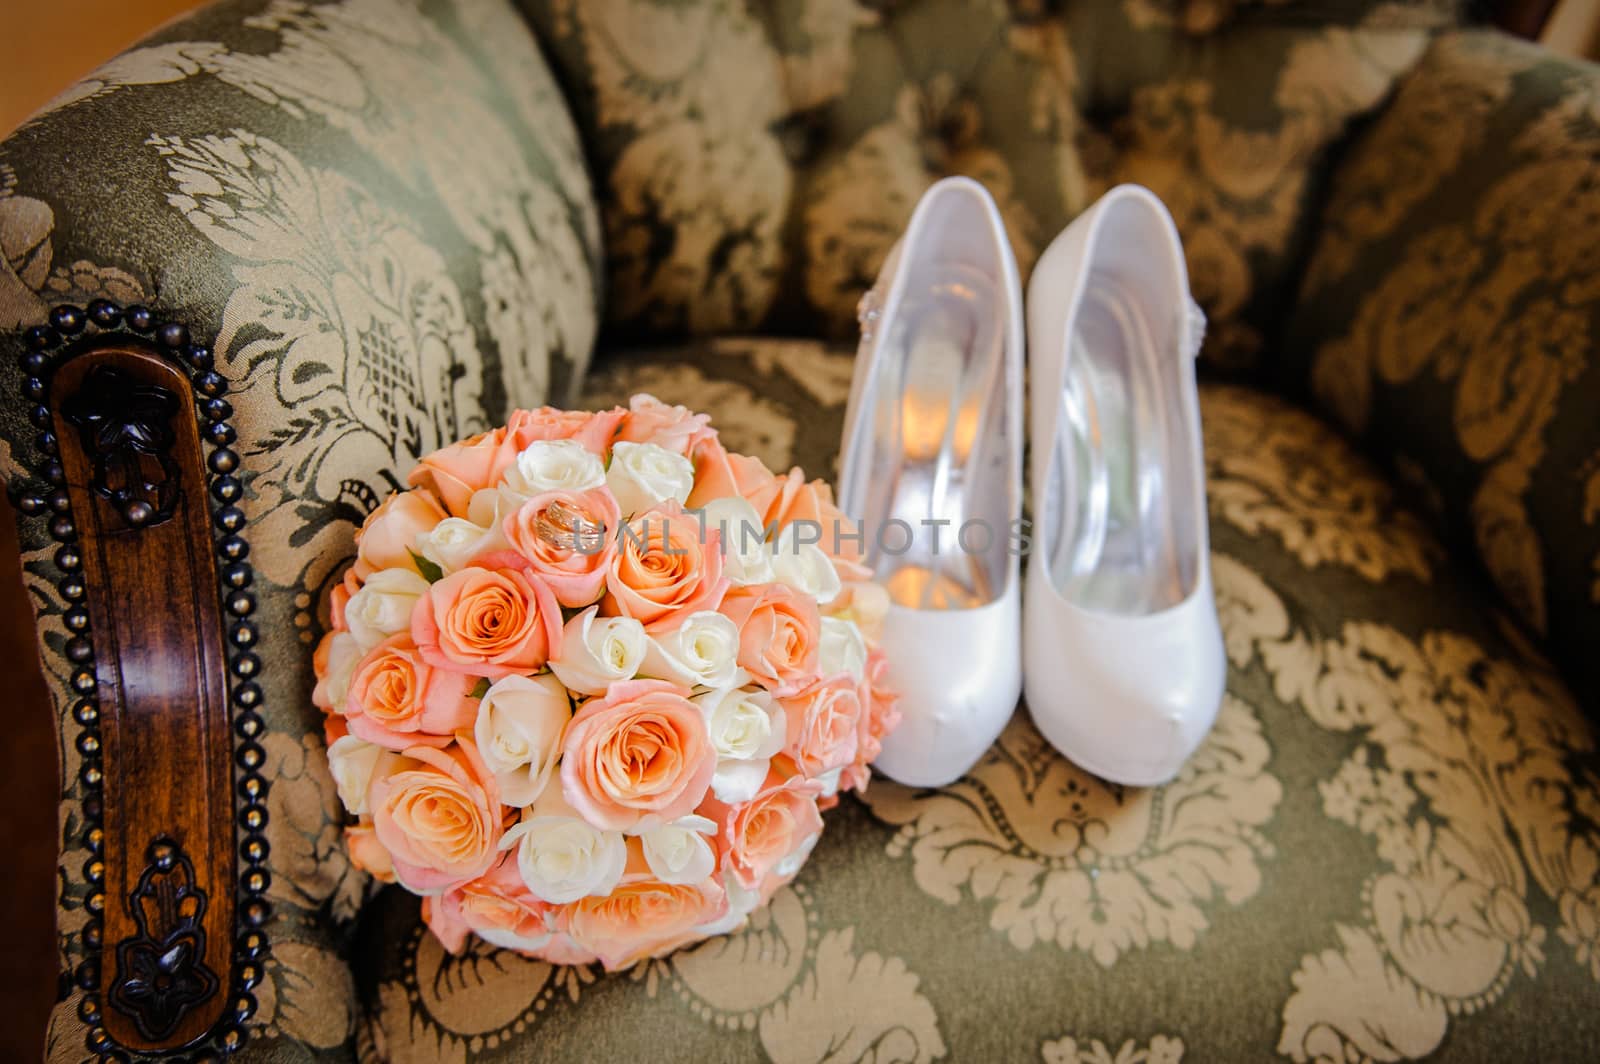 bridal bouquet and the bride shoes on chair